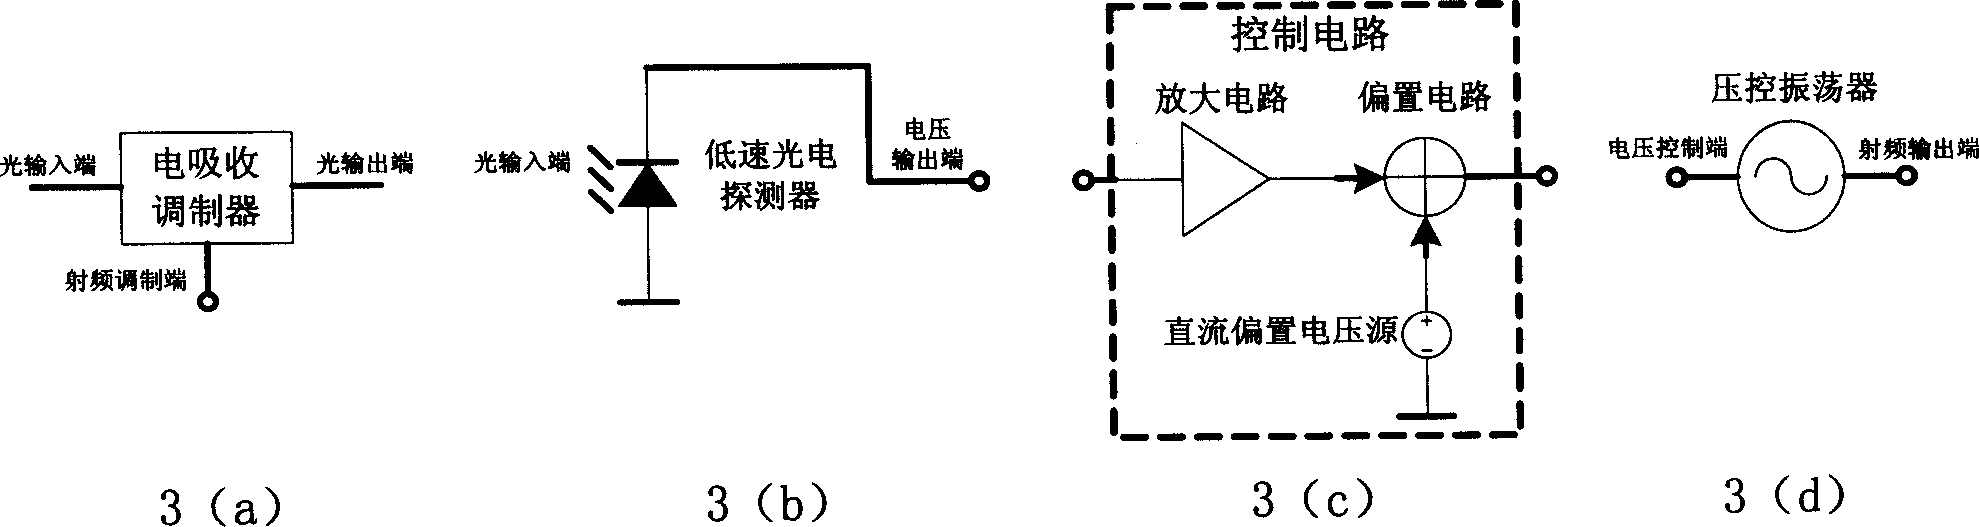 Photoelectric mixed phase-locked loop based on electric absorption regulator